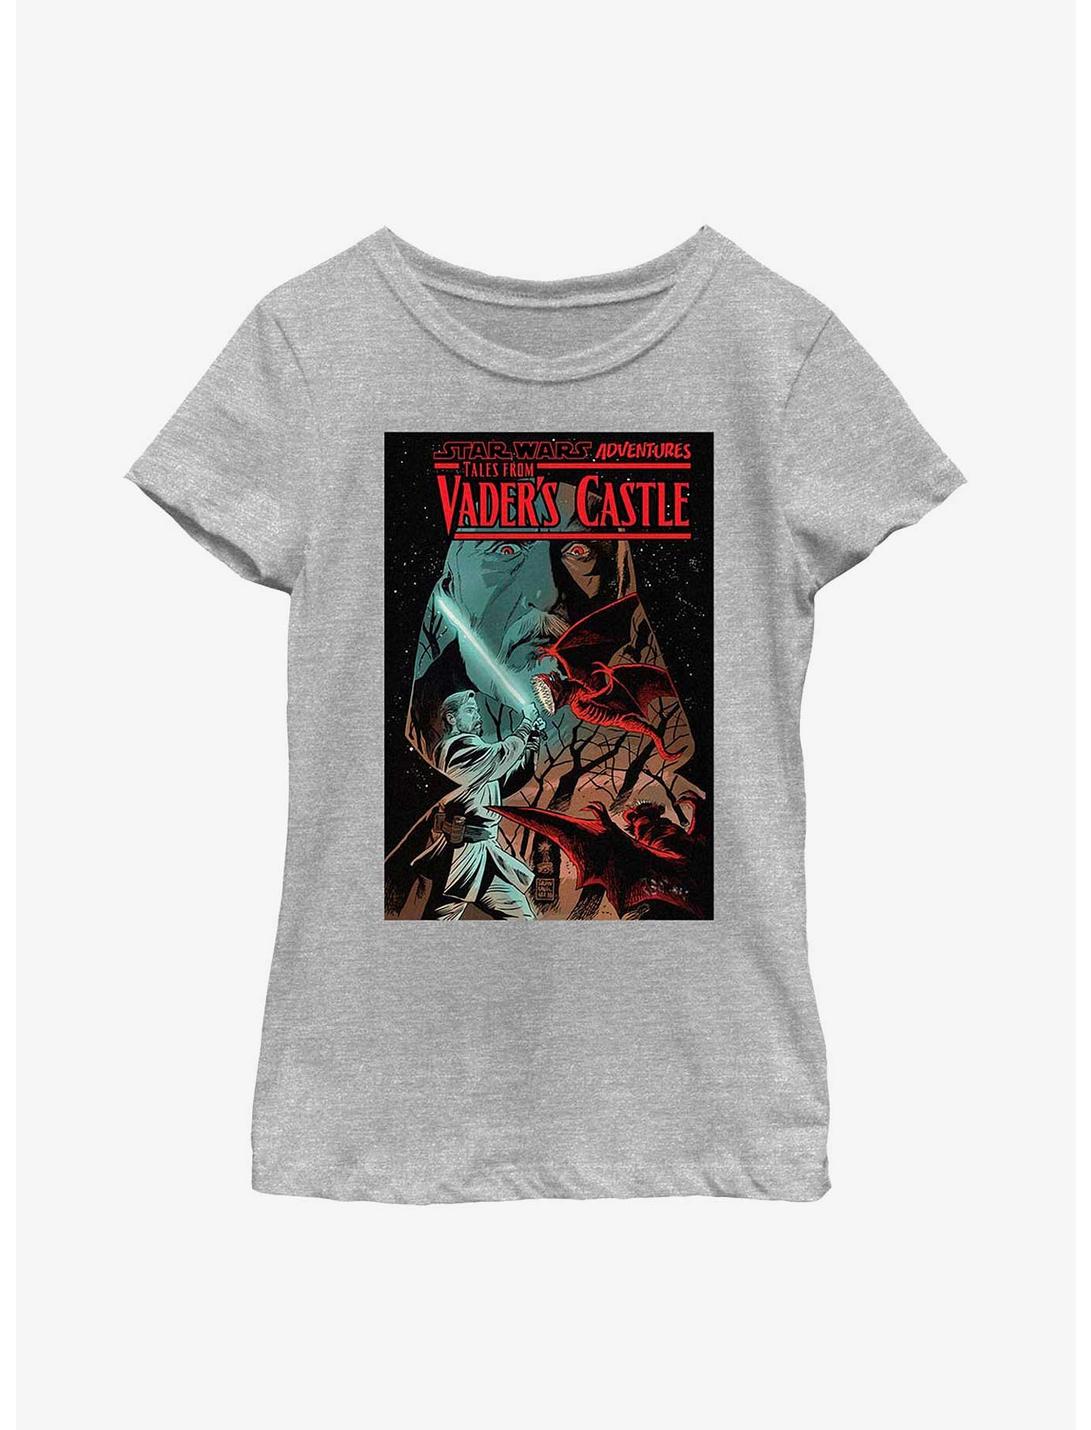 Star Wars Saber Tales From Vader's Castle Youth Girls T-Shirt, ATH HTR, hi-res